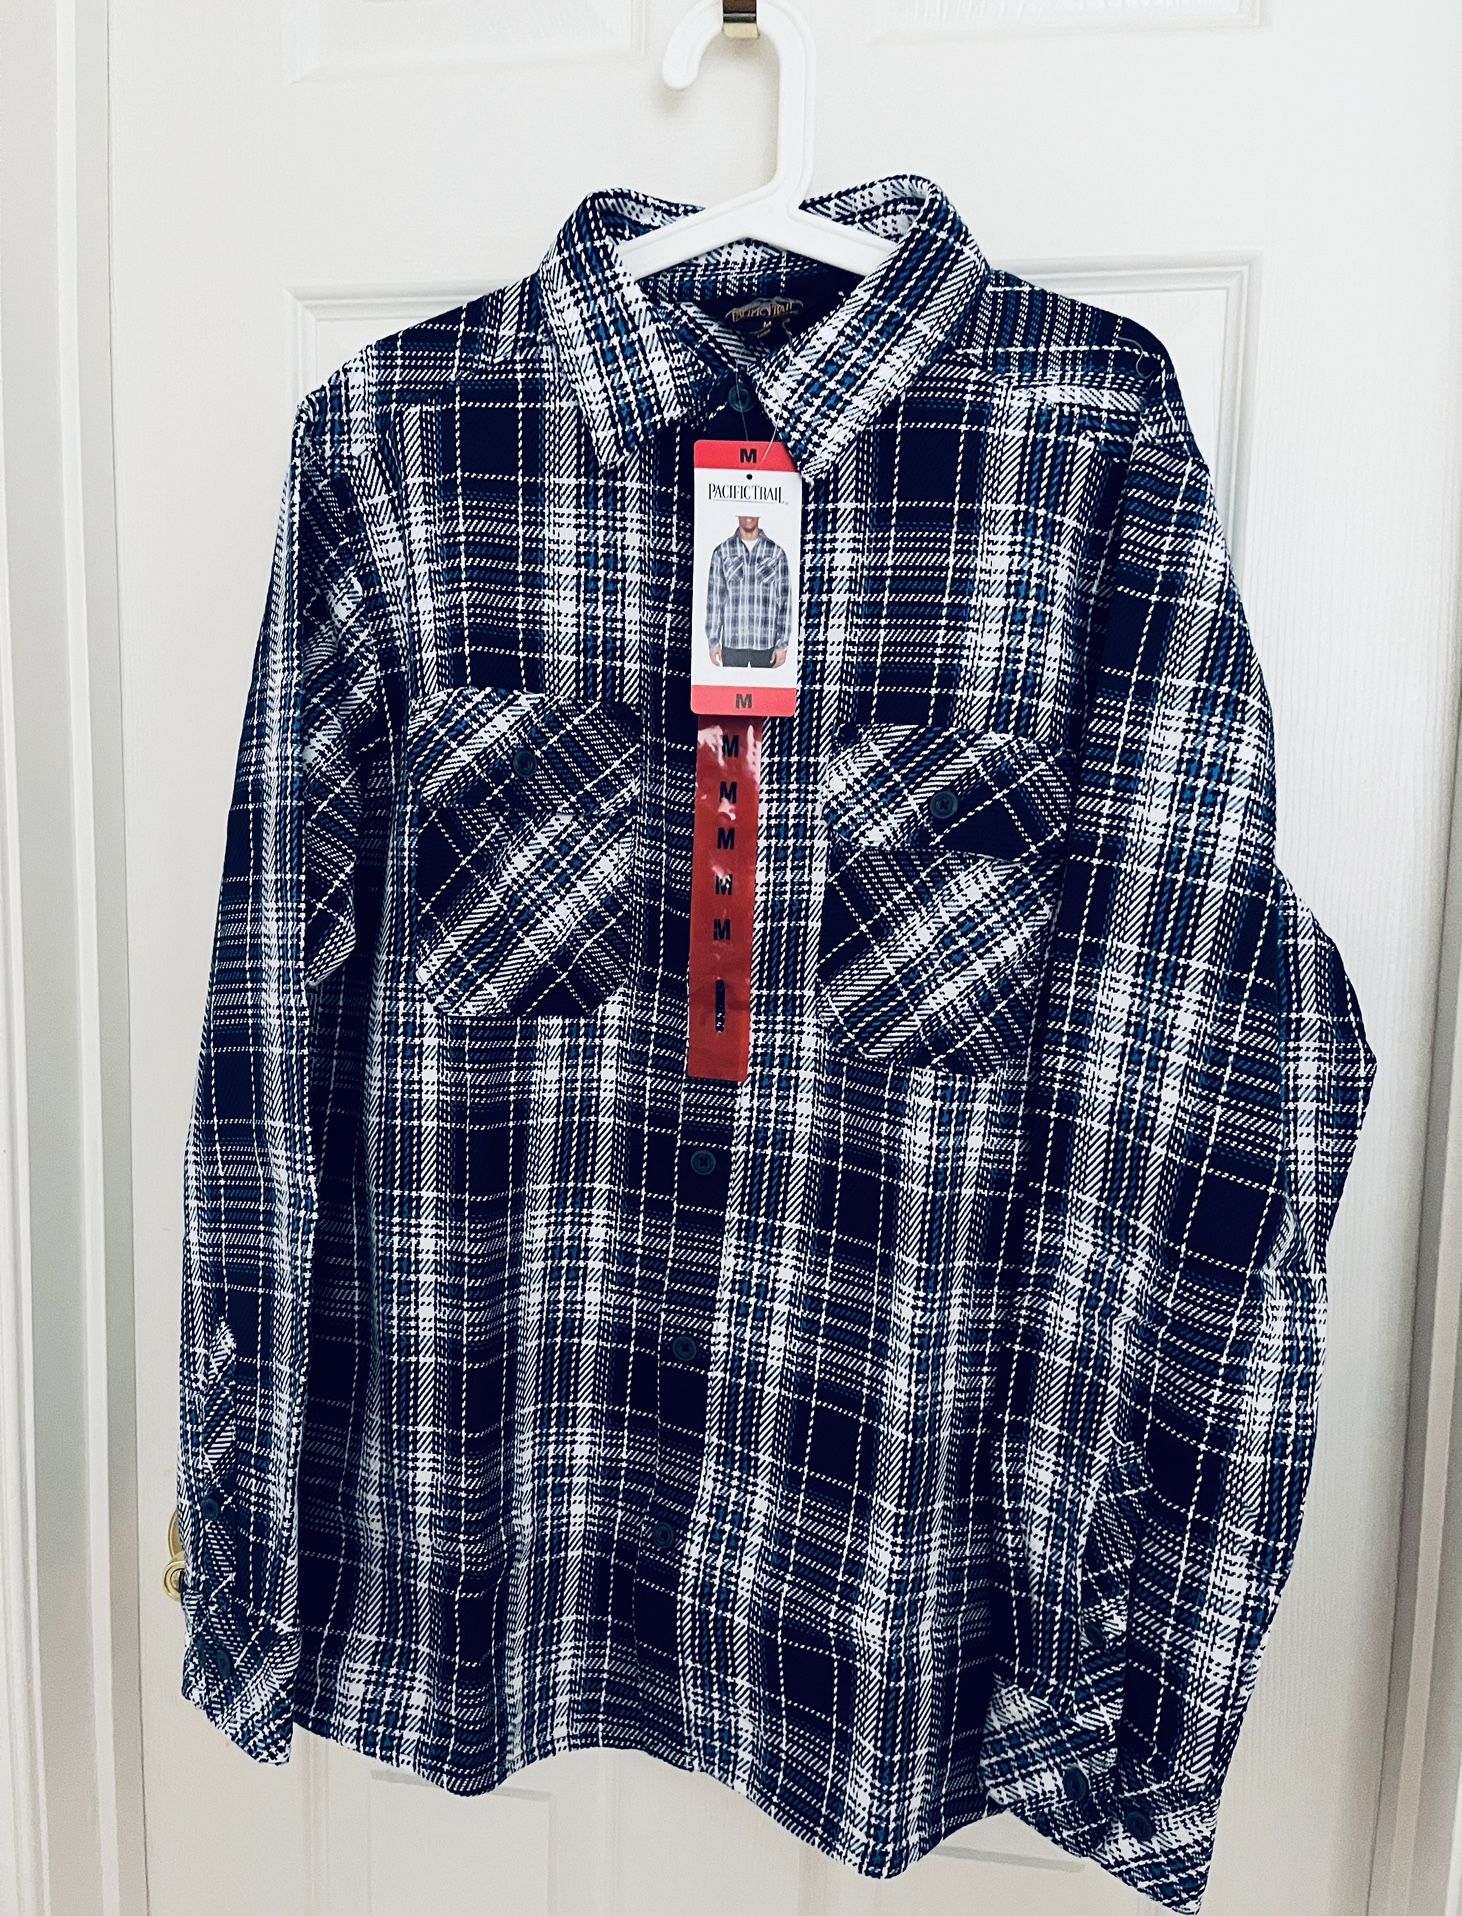 New Pacific Trail Men’s 100% Cotton Thick Long Sleeves Plaid Button Up Shirt Medium 